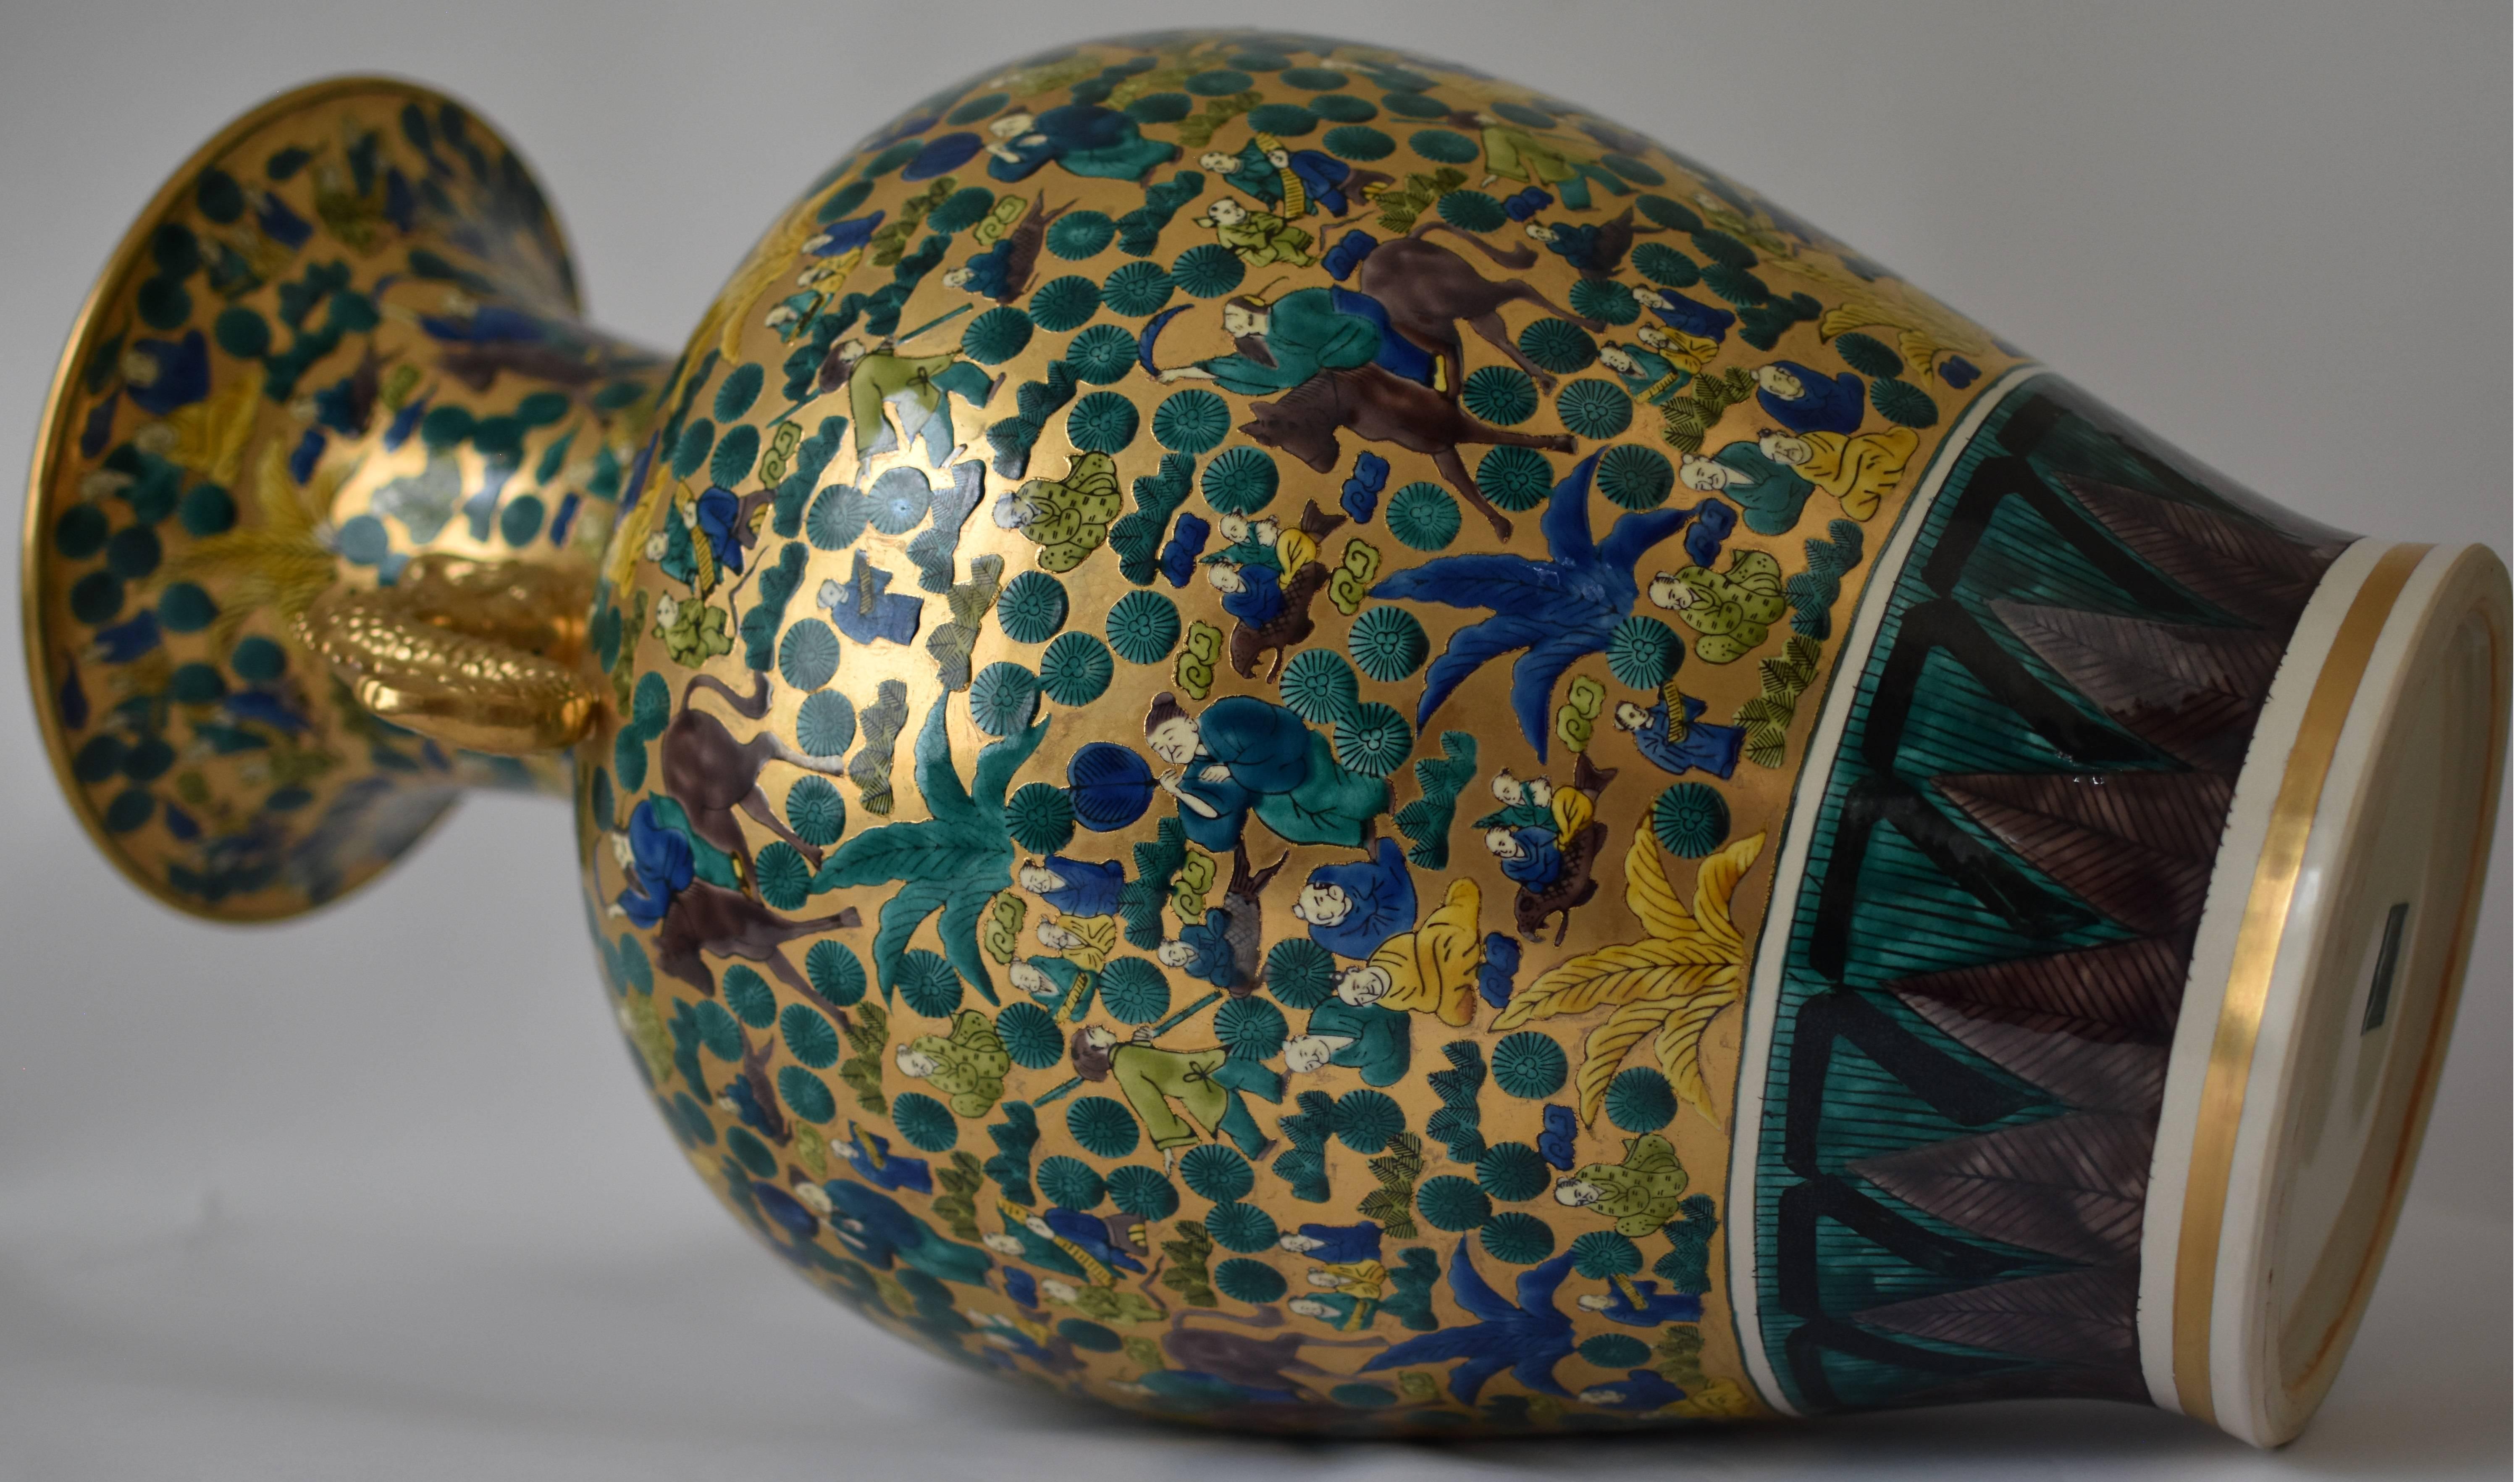 Japanese Contemporary Green Blue Gold Porcelain Vase by Master Artist, 2 In New Condition For Sale In Takarazuka, JP